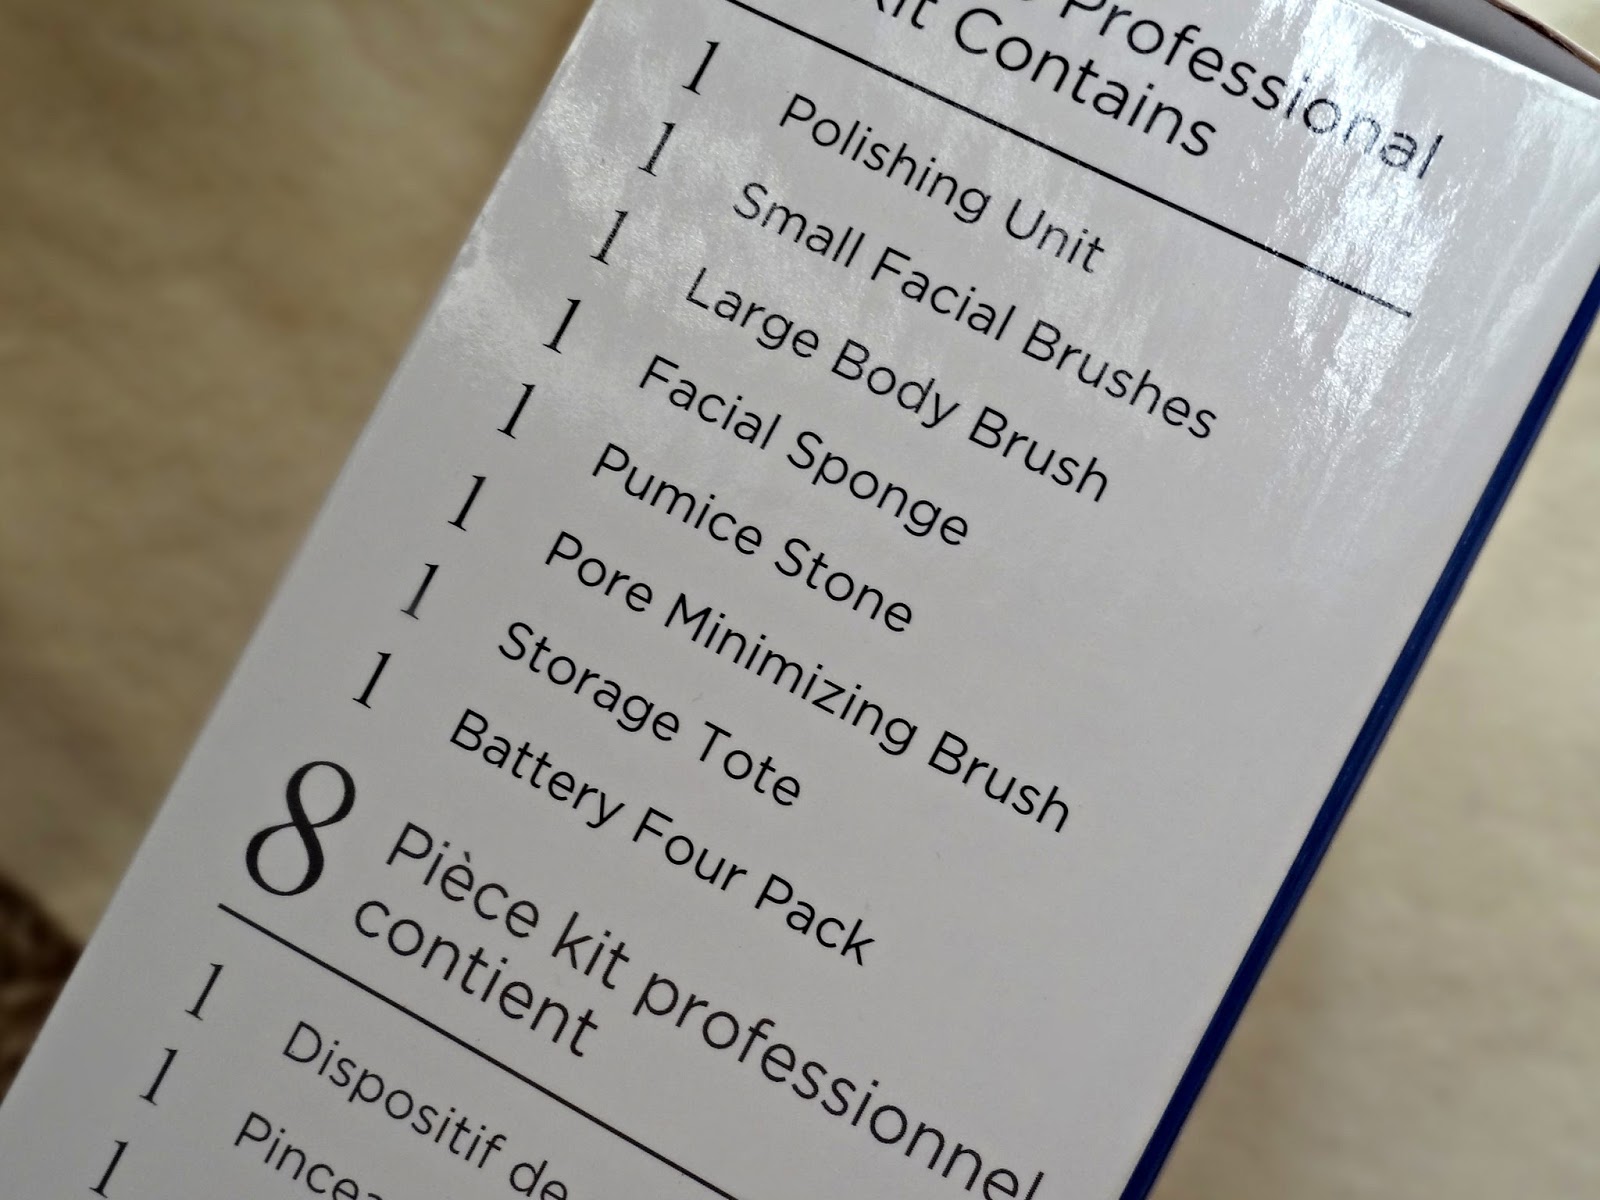 Spa Sonic Pro Skincare Cleansing System Review, Photos